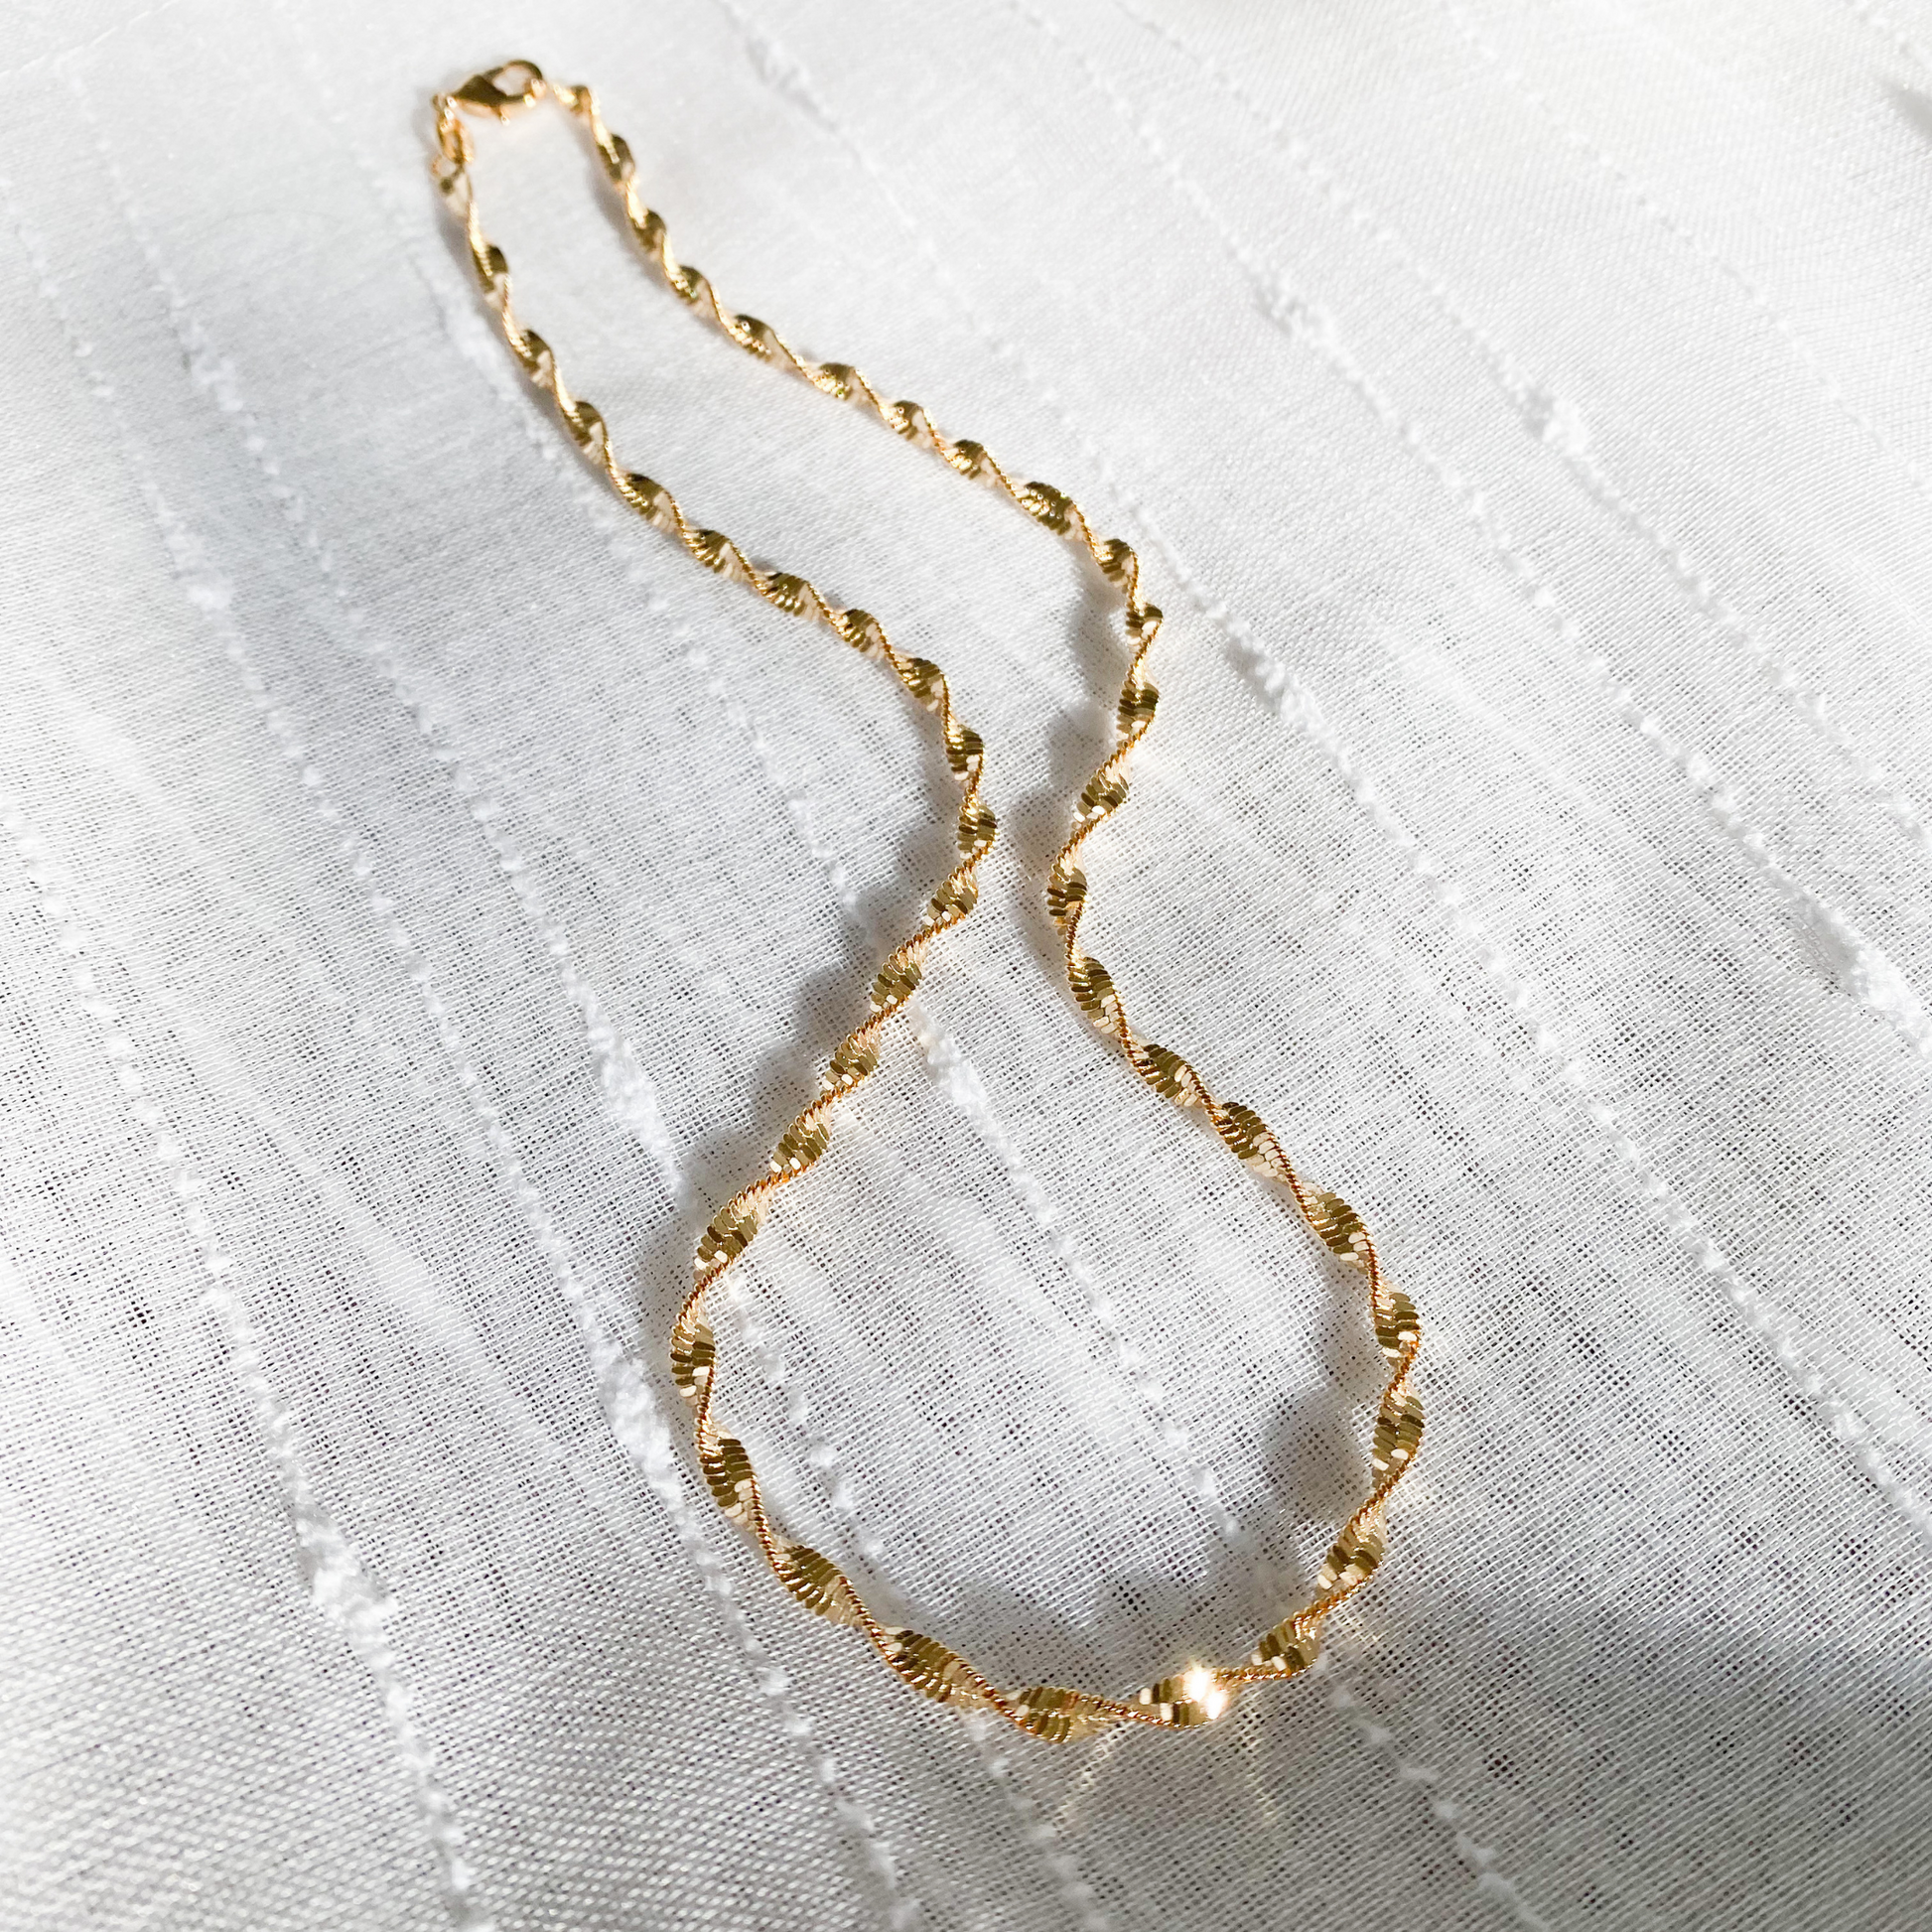 Roop Jewelry gold filled spiral necklace, hypoallergenic gold filled necklace.